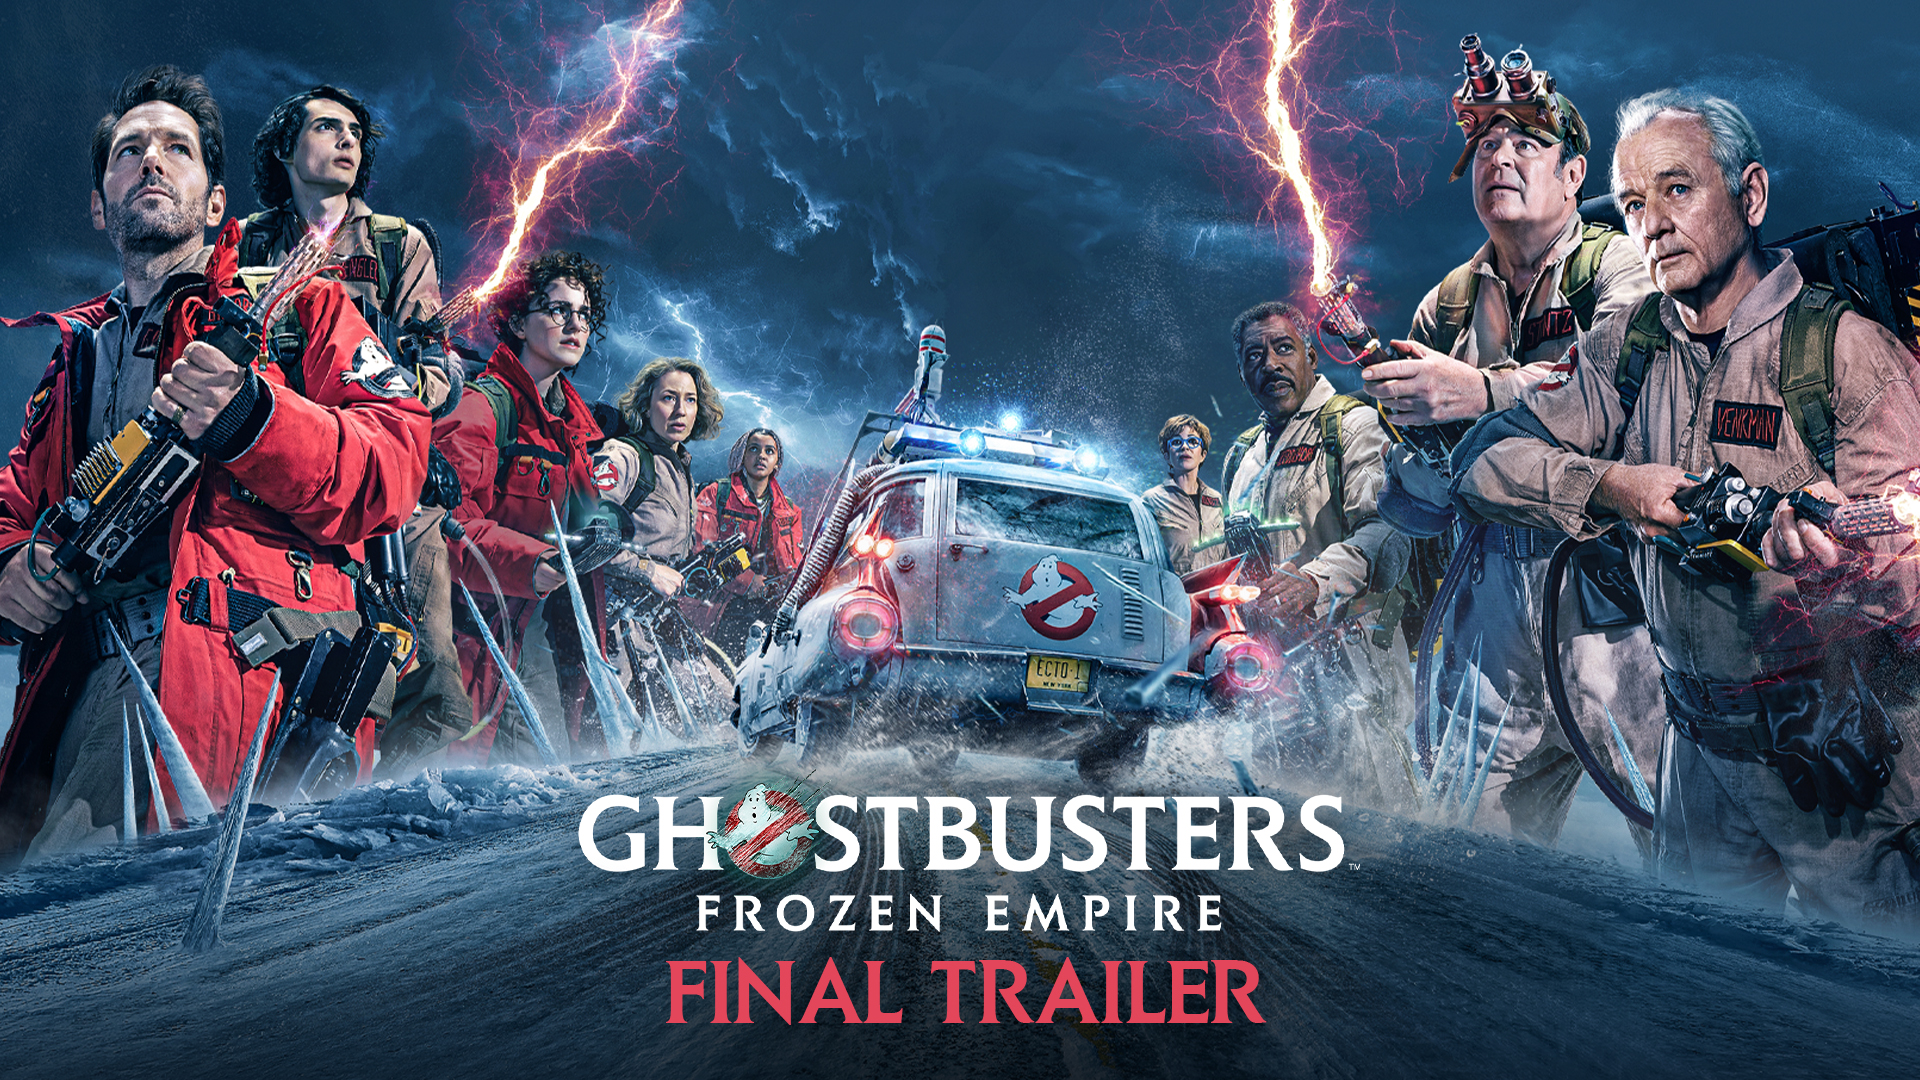 GHOSTBUSTERS: FROZEN EMPIRE Final Trailer Unveiled, Tickets Now on Sale